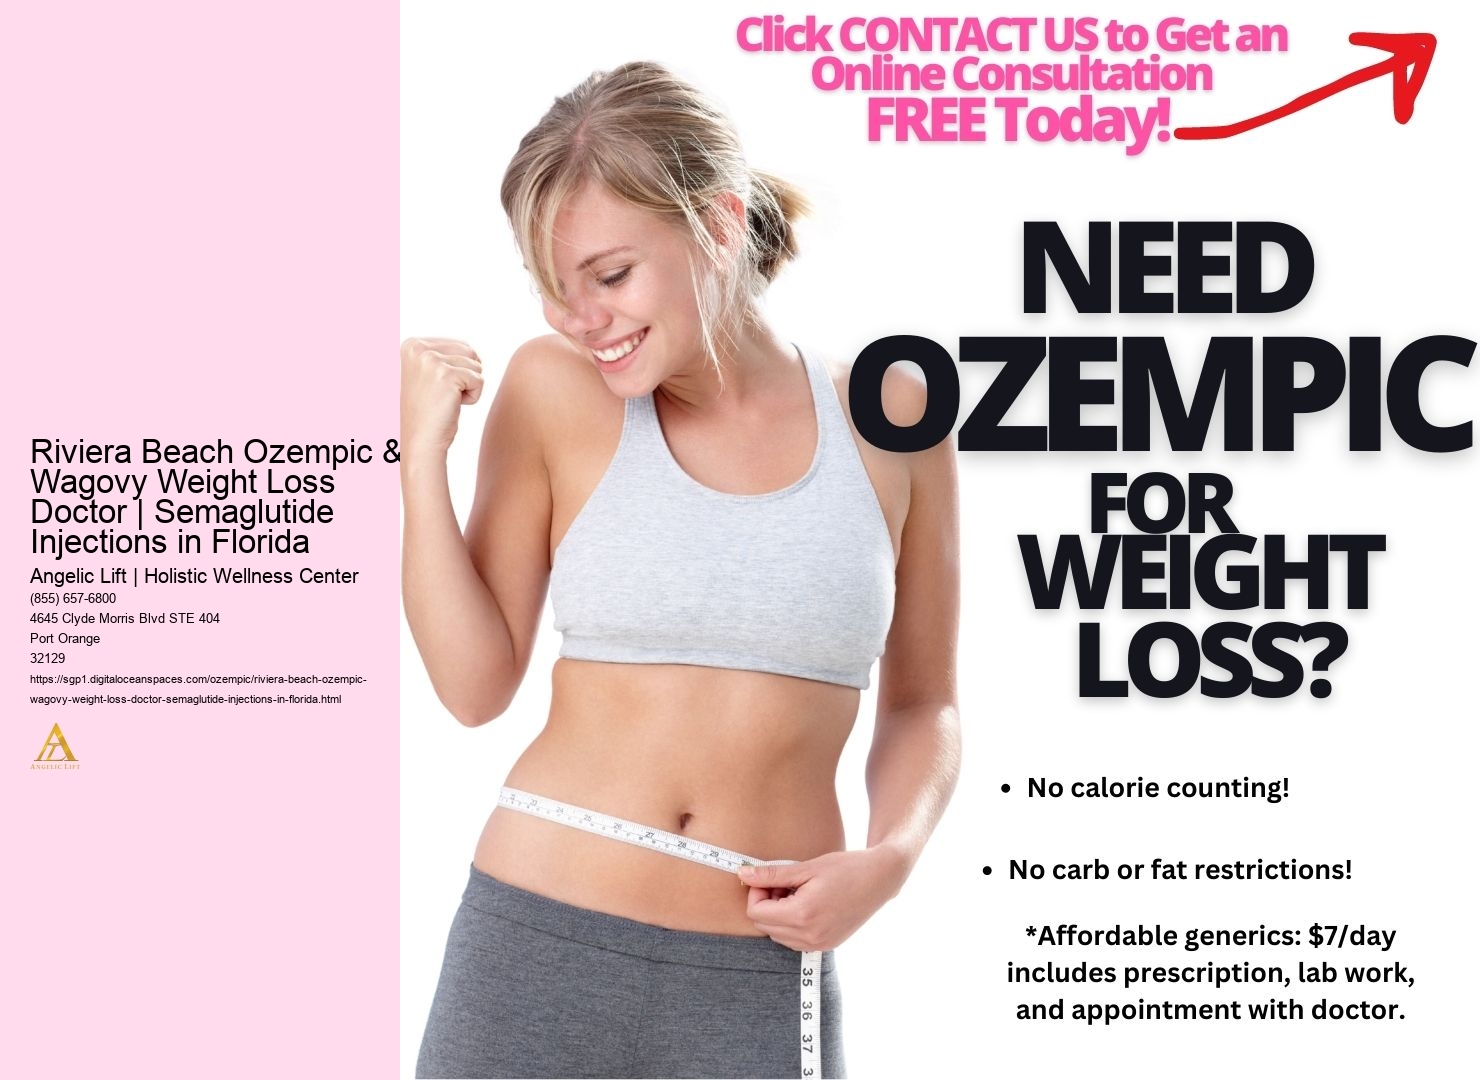 Riviera Beach Ozempic & Wagovy Weight Loss Doctor | Semaglutide Injections in Florida